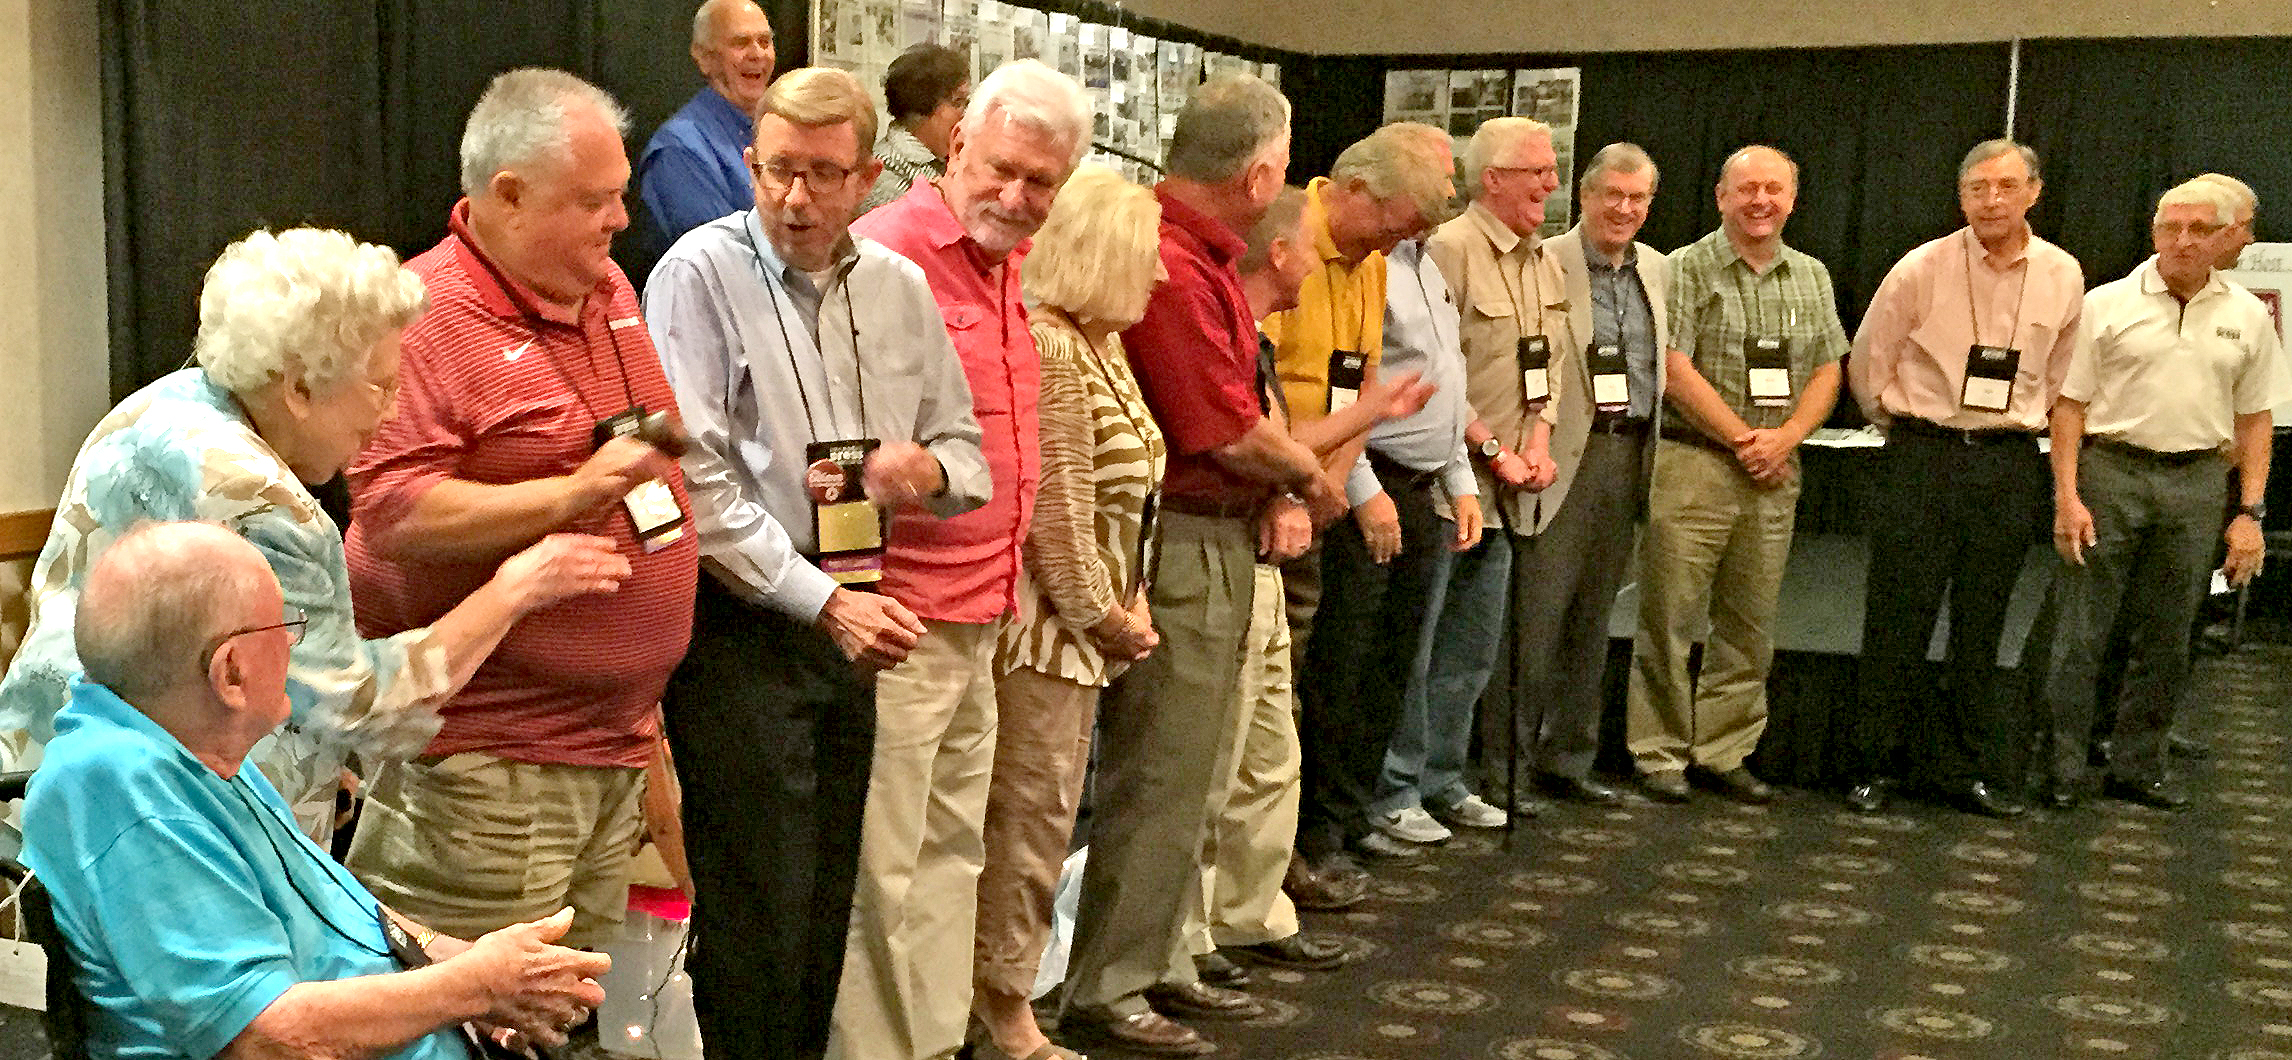 APA Tradition: Louie Graves (third from left) of The Nashville Leader participated in the traditional passing of the gavel from APA past presidents to the incoming president at the APA convention.